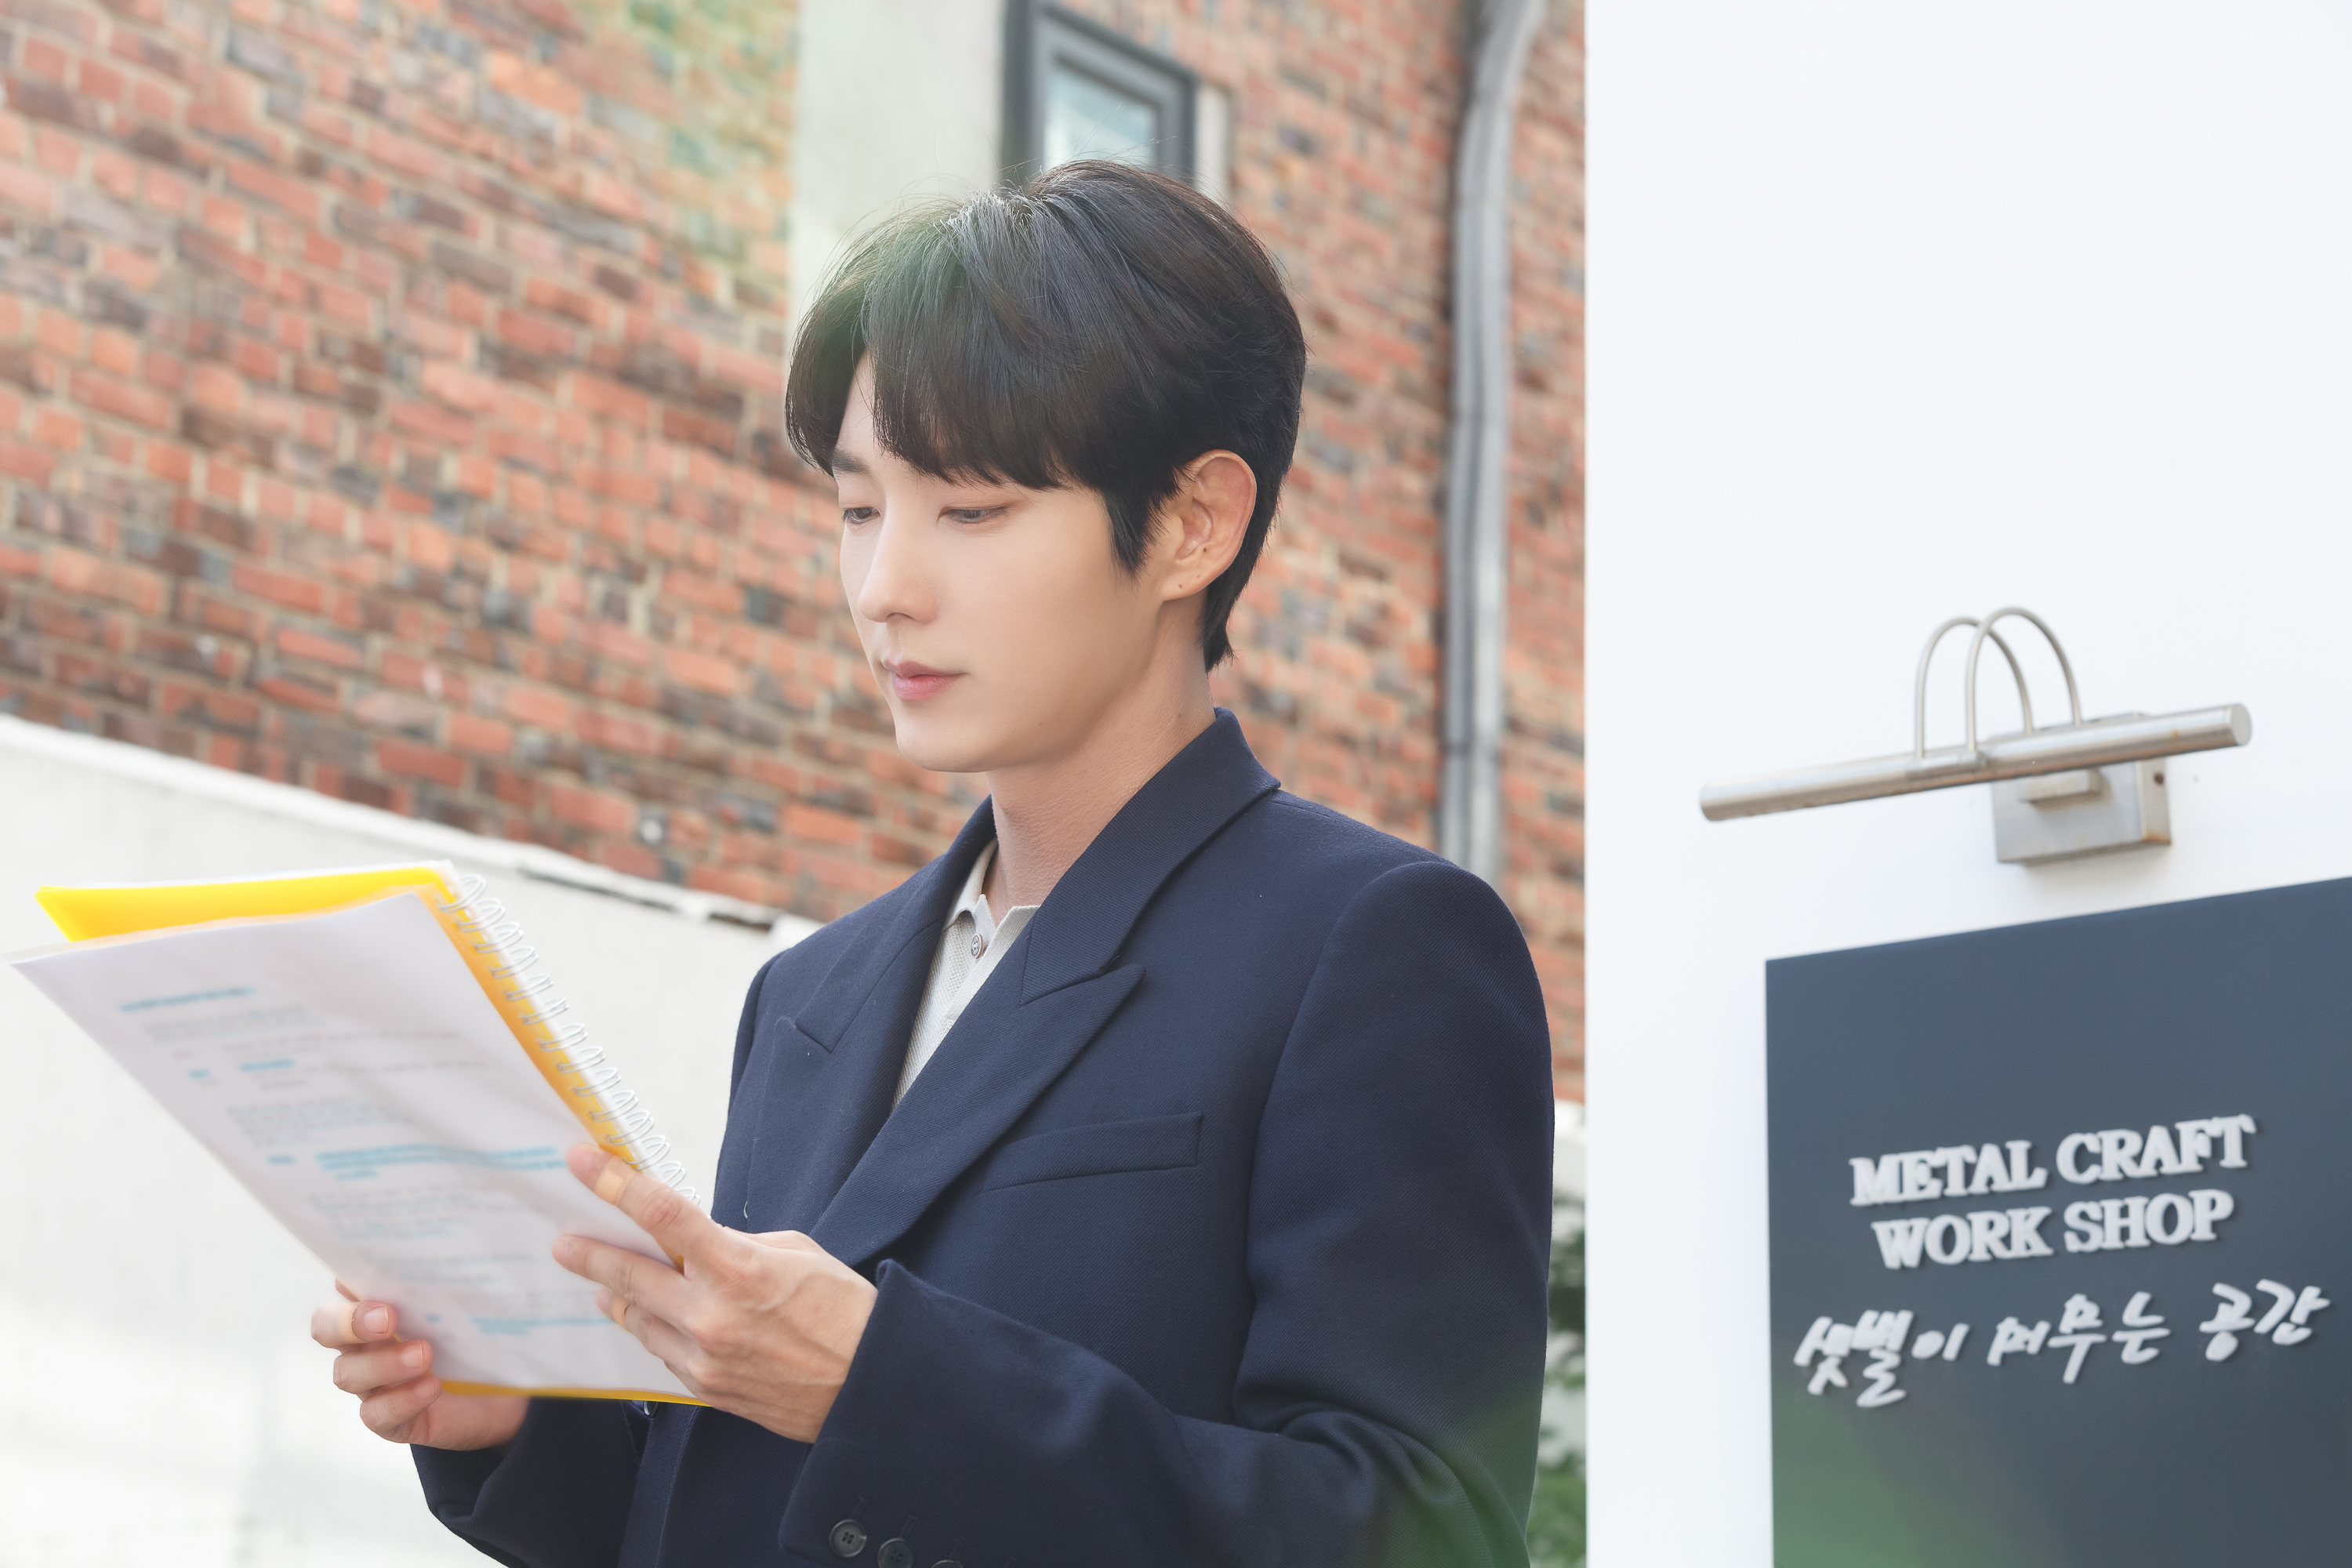 Lee Joon-gi also came out with a favorable review.Actor Lee Joon-gi once again proved the wide Acting spectrum by playing the role of Baek Hee-sung, who was living in the end TVN Flower of Evil on the 23rd, hiding the identity of Do Hyun-soo and washing his identity.He made a tightrope between Mello and Suspense with his wife, Cha Ji-won, who doubted his reality, and showed bromance with unexpected cooperation and Tikitaka with Kim Moo-jin (Seo Hyun-woo).He was evaluated as having succeeded in showing three-dimensional and colorful appearance in a single work through Flower of Evil.Star had a written interview with Lee Joon-gi, who successfully completed his return to the drama for two years, and shared various stories about the drama.After the end, I go to the interview, so I feel the nostalgia for all things again, and the feeling is more crossed.I am lonely and thankful for many things. He had to act two characters in the play, Baek Hee Sung and Do Hyun Soo.In particular, Lee Joon-gis double act of Do Hyun-soo who plays Baek Hee-sung attracted attention.Lee Joon-gi in the complexly intertwined Feeling line has not lost his own center.If there is a part that I have especially cared about, I have been rehearsing the past scenes through rehearsals and wondered what Feeling flow and high and low will be convincing with Actors.Personally, thanks to Moon Chae-won, I think I could draw more diverse reactions.And without the efforts of the actors who made a wonderful ensemble, the explosive power of Feeling in the second half would not have gained synergy. Lee Joon-gi said, If you try to recall it many times, it will be a shame, but the ending of the present is quite satisfactory. The ending that the new life of Do Hyun-soo is started and accepted seemed to be the process of falling the sickest petals of life and blooming beautiful peaks again.I think it was a good ending, he added.He said: I made up the Characters by sharing these and other ideas with Mr. Moon Chae-won.Chae Won is a very delicate actor with great power in concentrating on Feeling, so he filled a lot of things I could miss.Thanks to that, at the end, I was heartbroken even if I thought of the car support. In fact, Moon Chae-won and couple Acting have become a lot of talk.Actor Moon Chae-won in the field is delicate and highly focused, and is an actor who is worried until he can interpret the Feeling.So when I was working together with each other, I was more stimulated and helped in the Feeling part. Meanwhile, Lee Joon-gi is reviewing his next work after the Flower of Evil End.